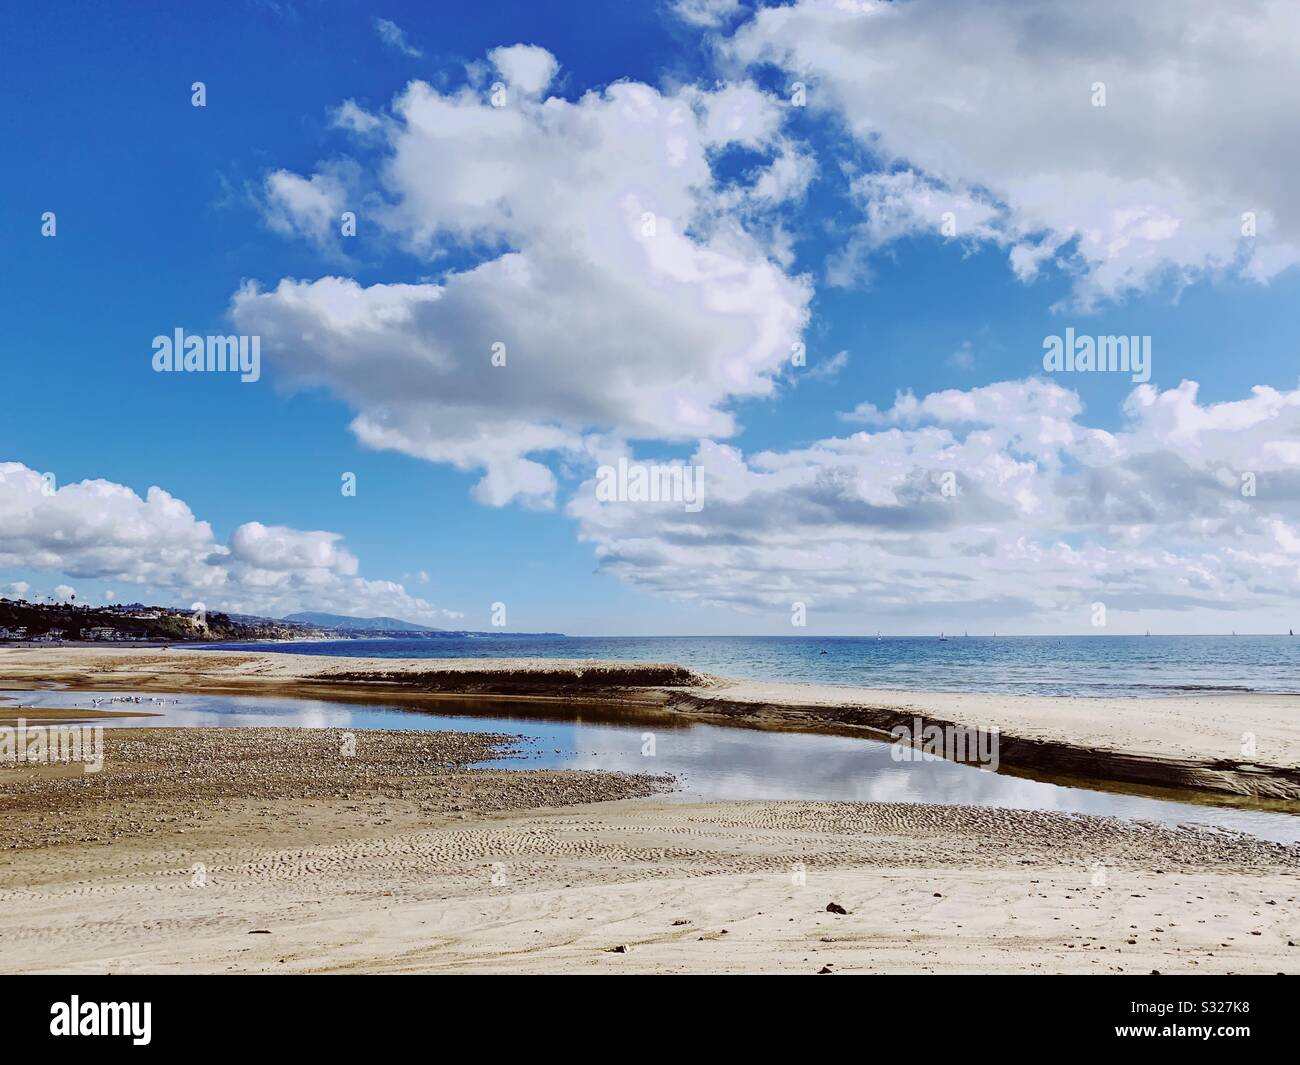 Sandy beach on a sunny day with white clouds reflecting in the water. Stock Photo